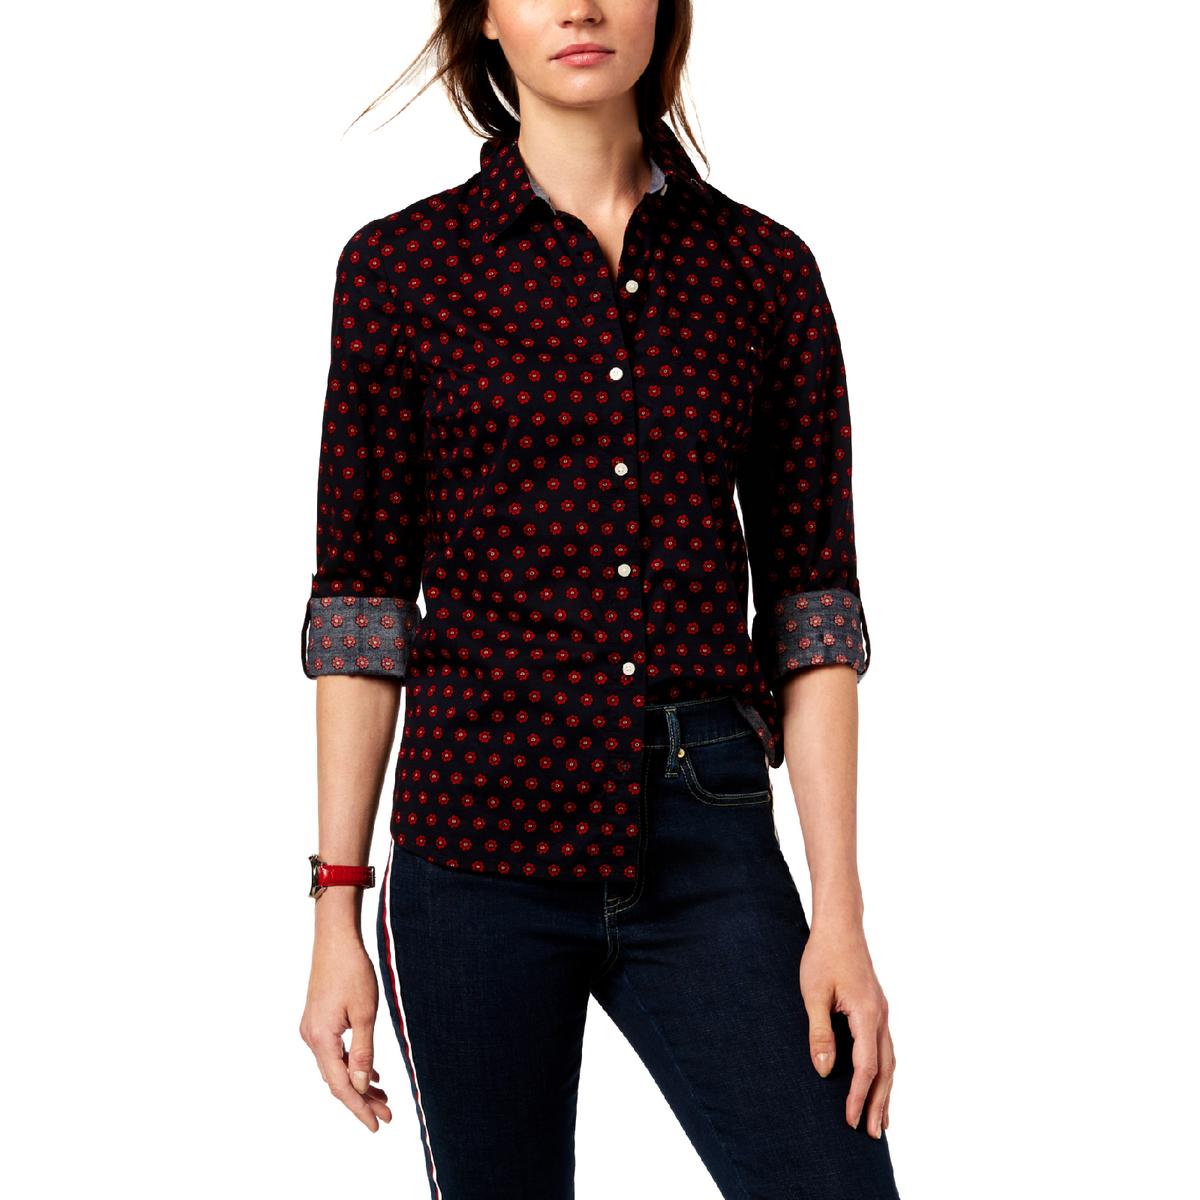 Tommy Hilfiger Womens Navy Floral Print Button Down Top Blouse Xs Bhfo 7222 Ebay